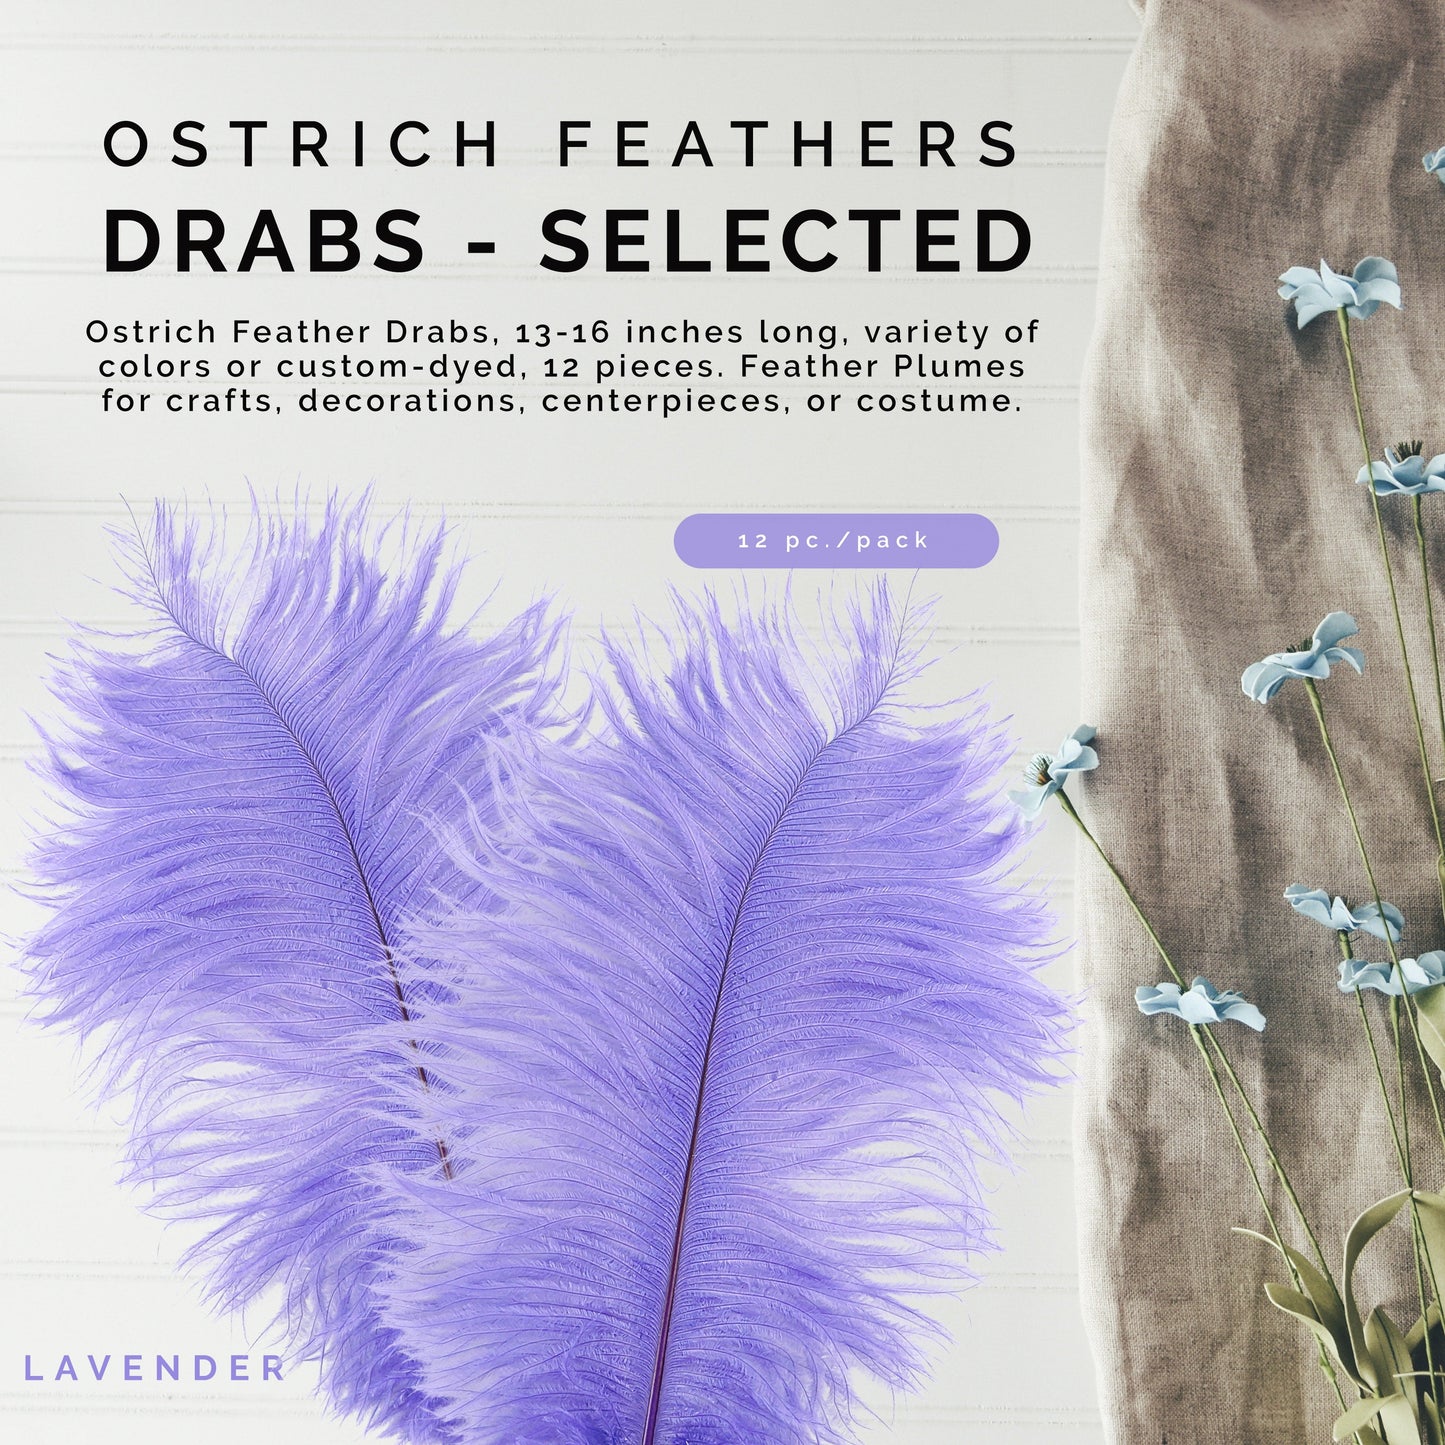 Ostrich Feathers 13-16" Drabs - Lavender